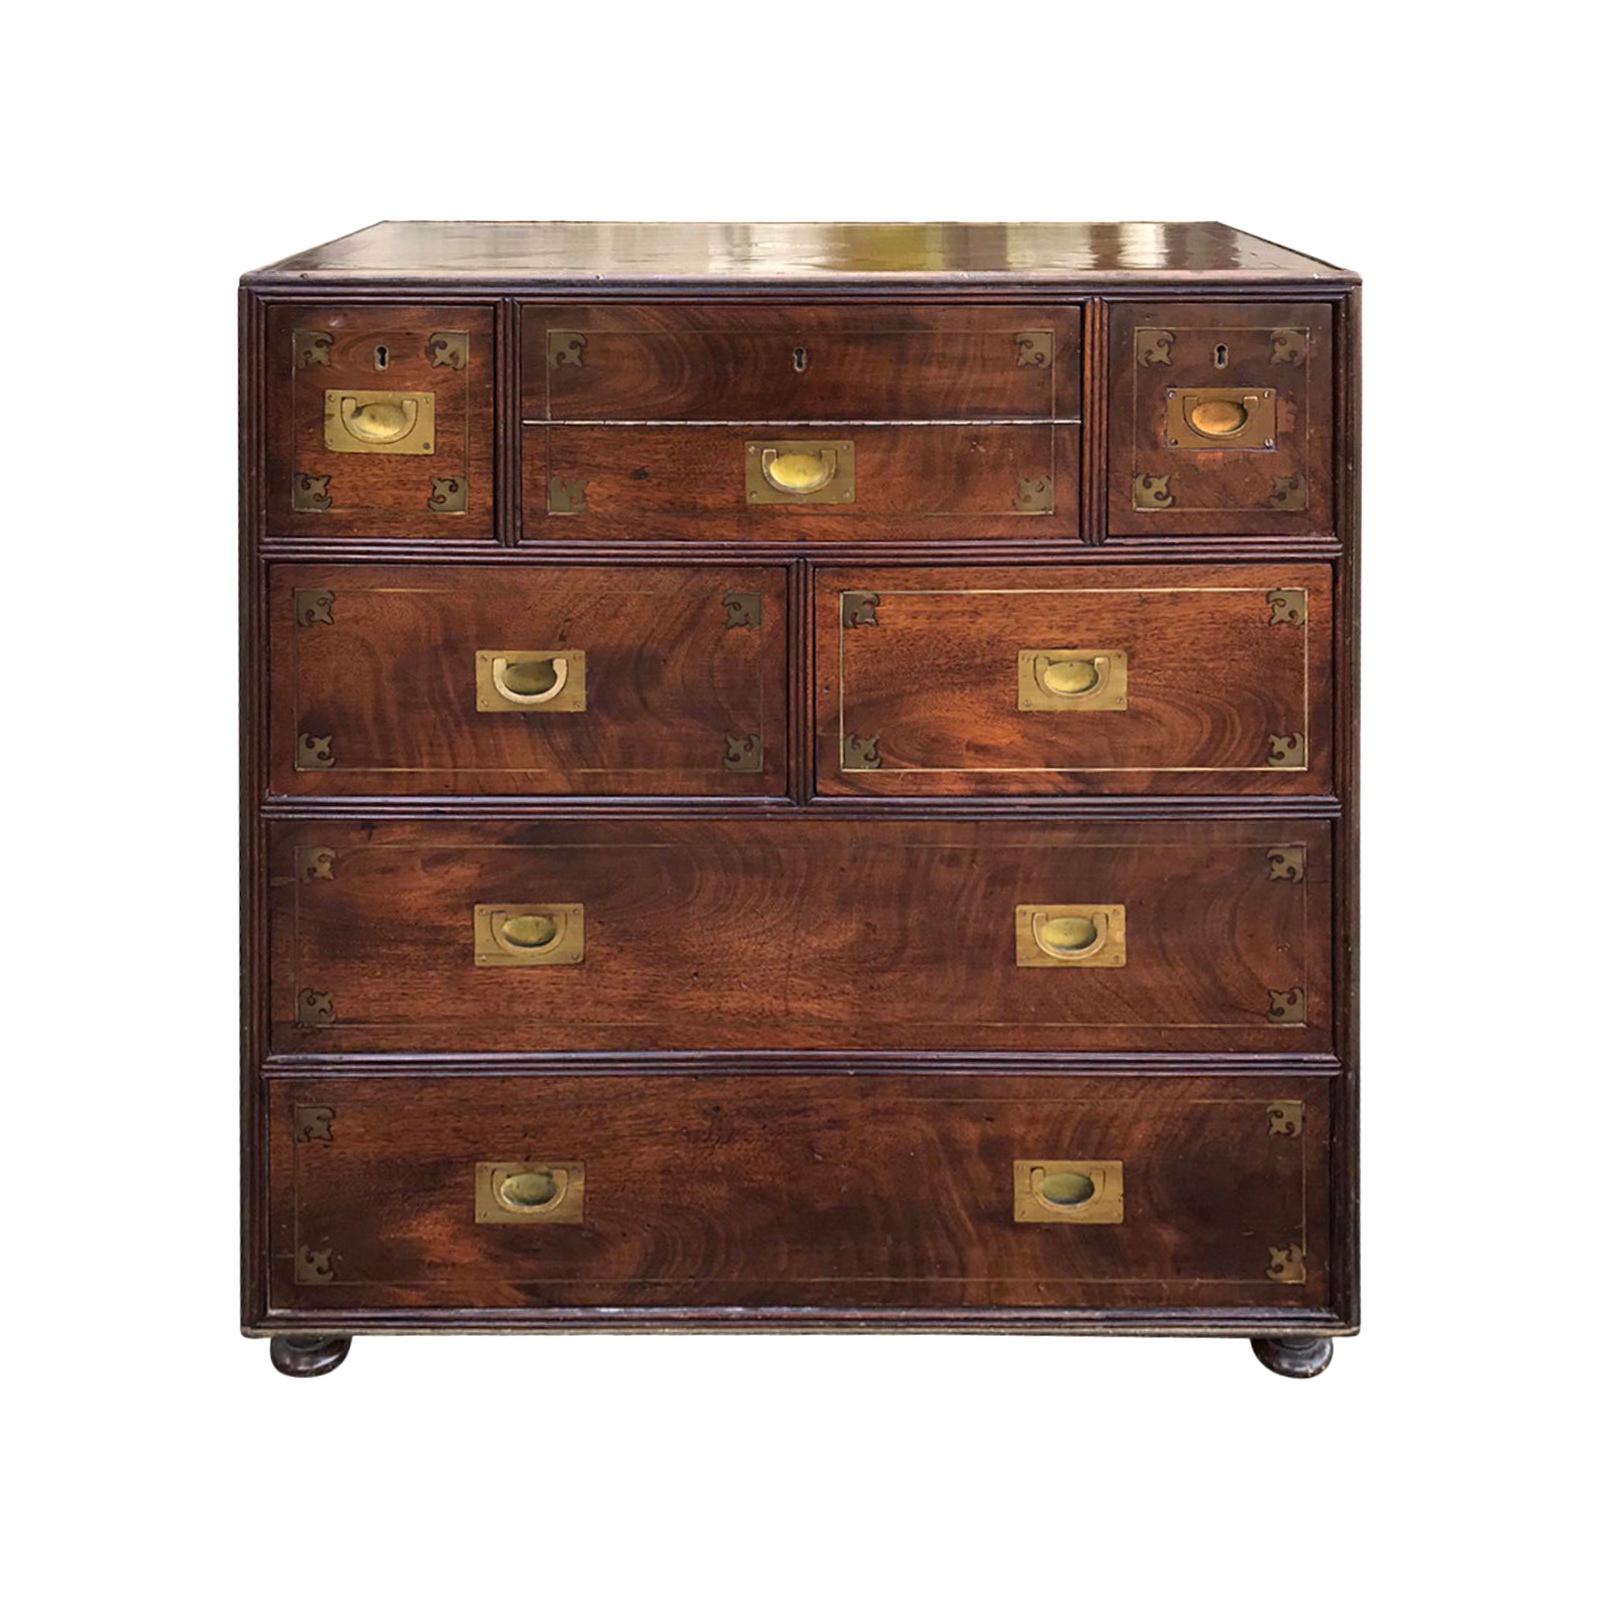 20th Century Mahogany Campaign Style Secretary Chest with Brass Inlay and Mounts